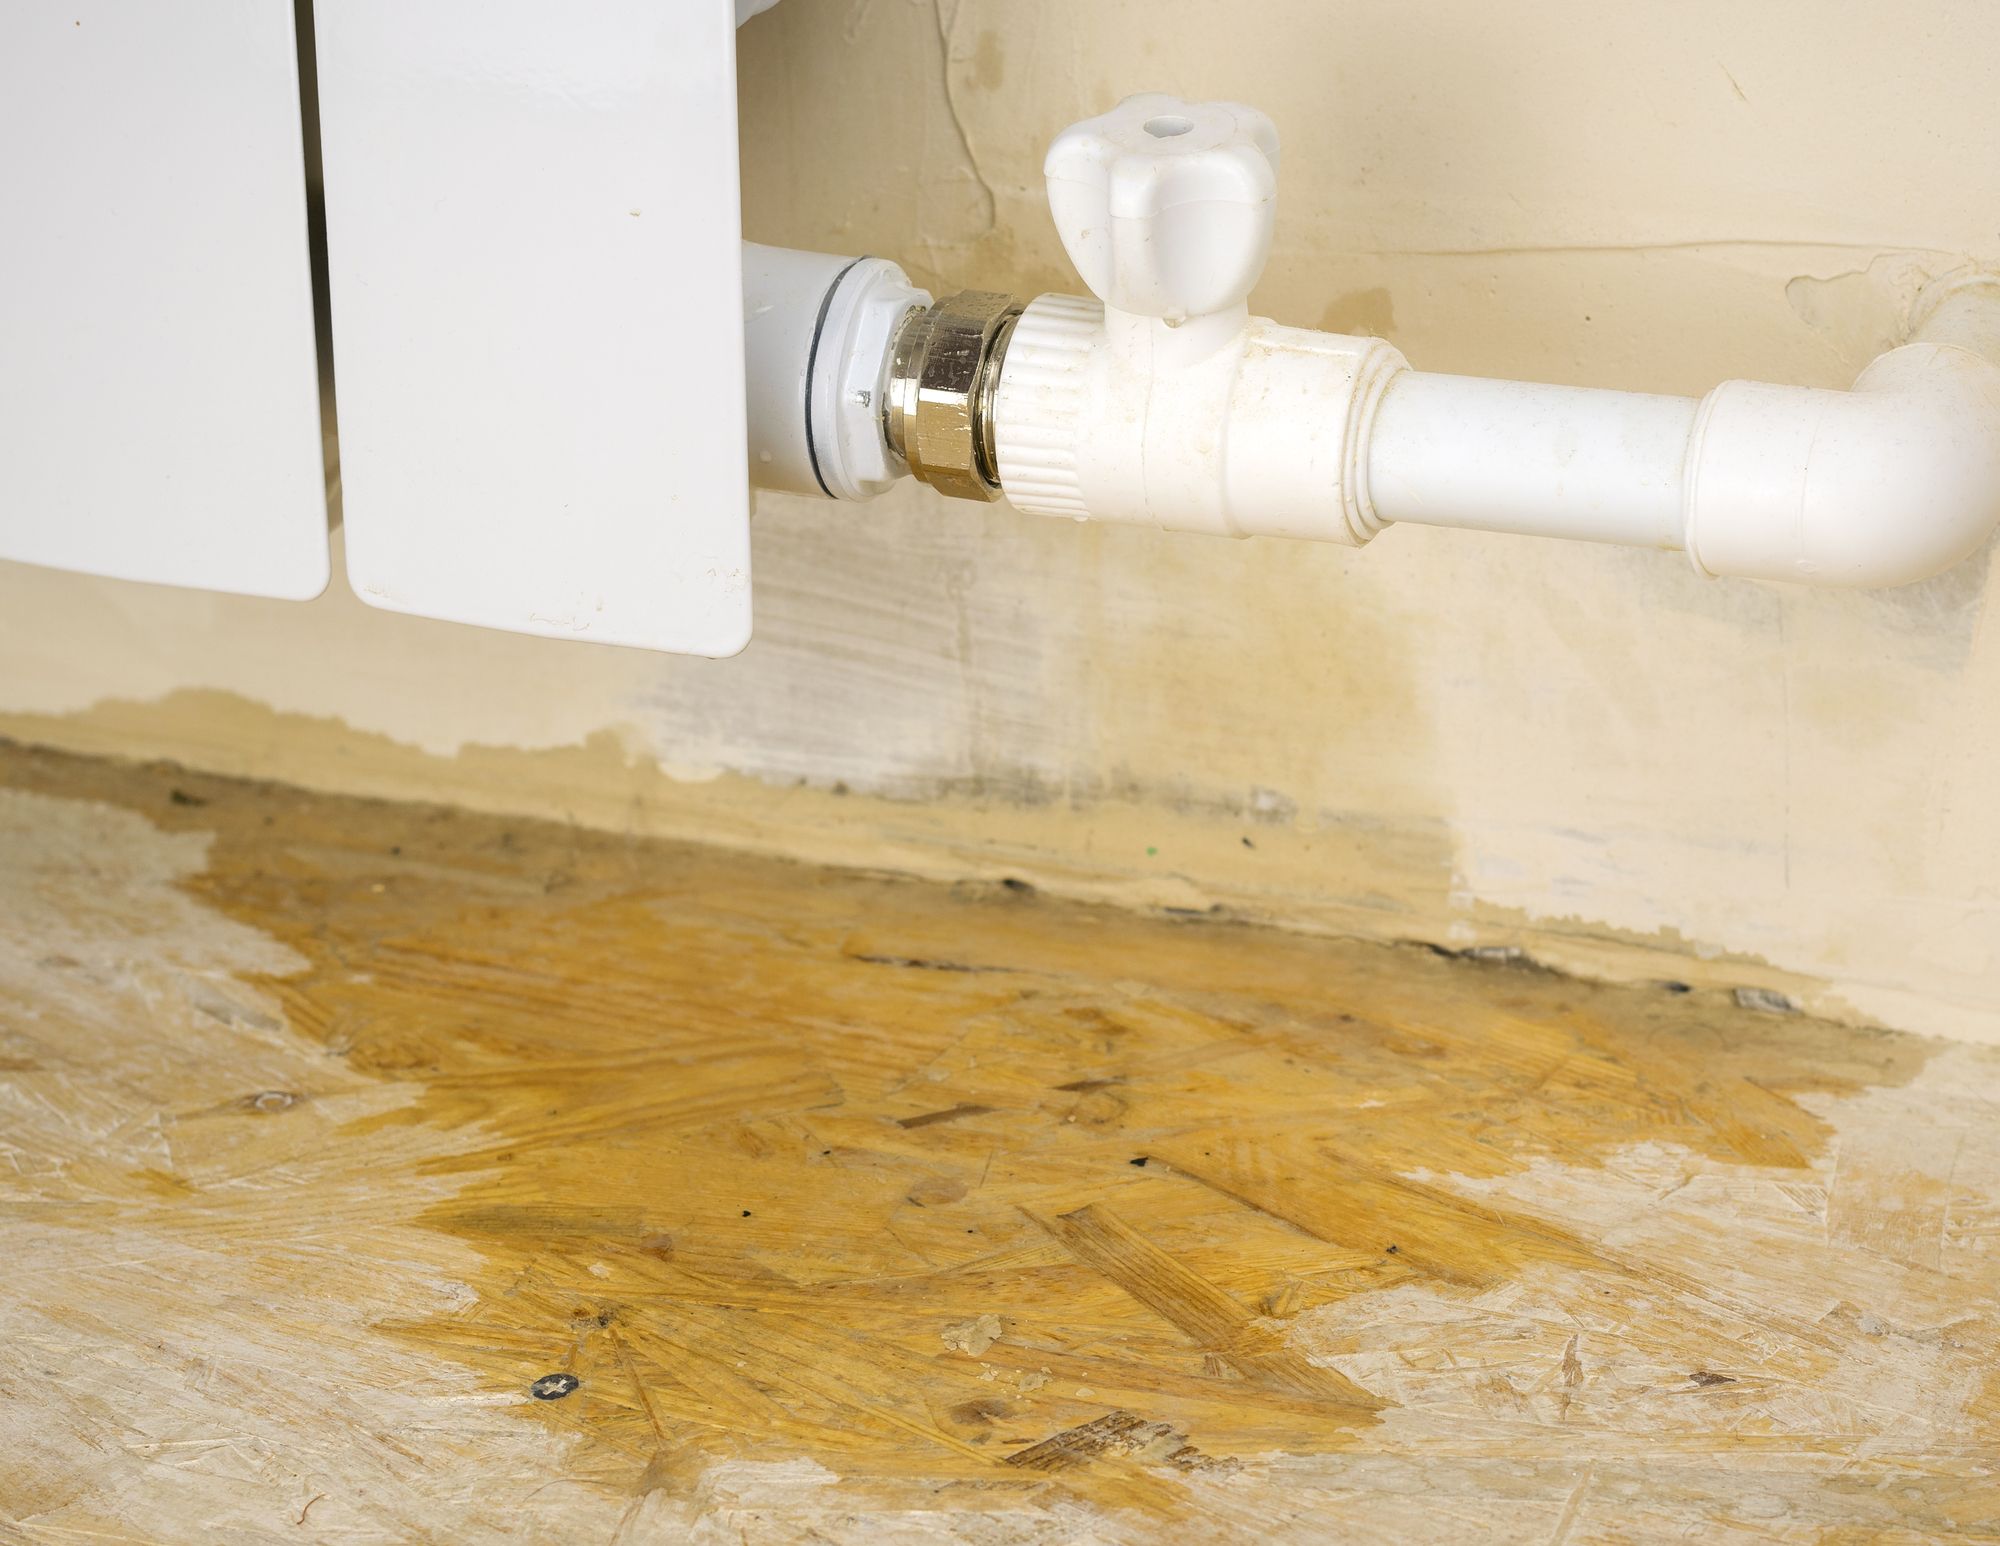 How to detect water leaks in your home